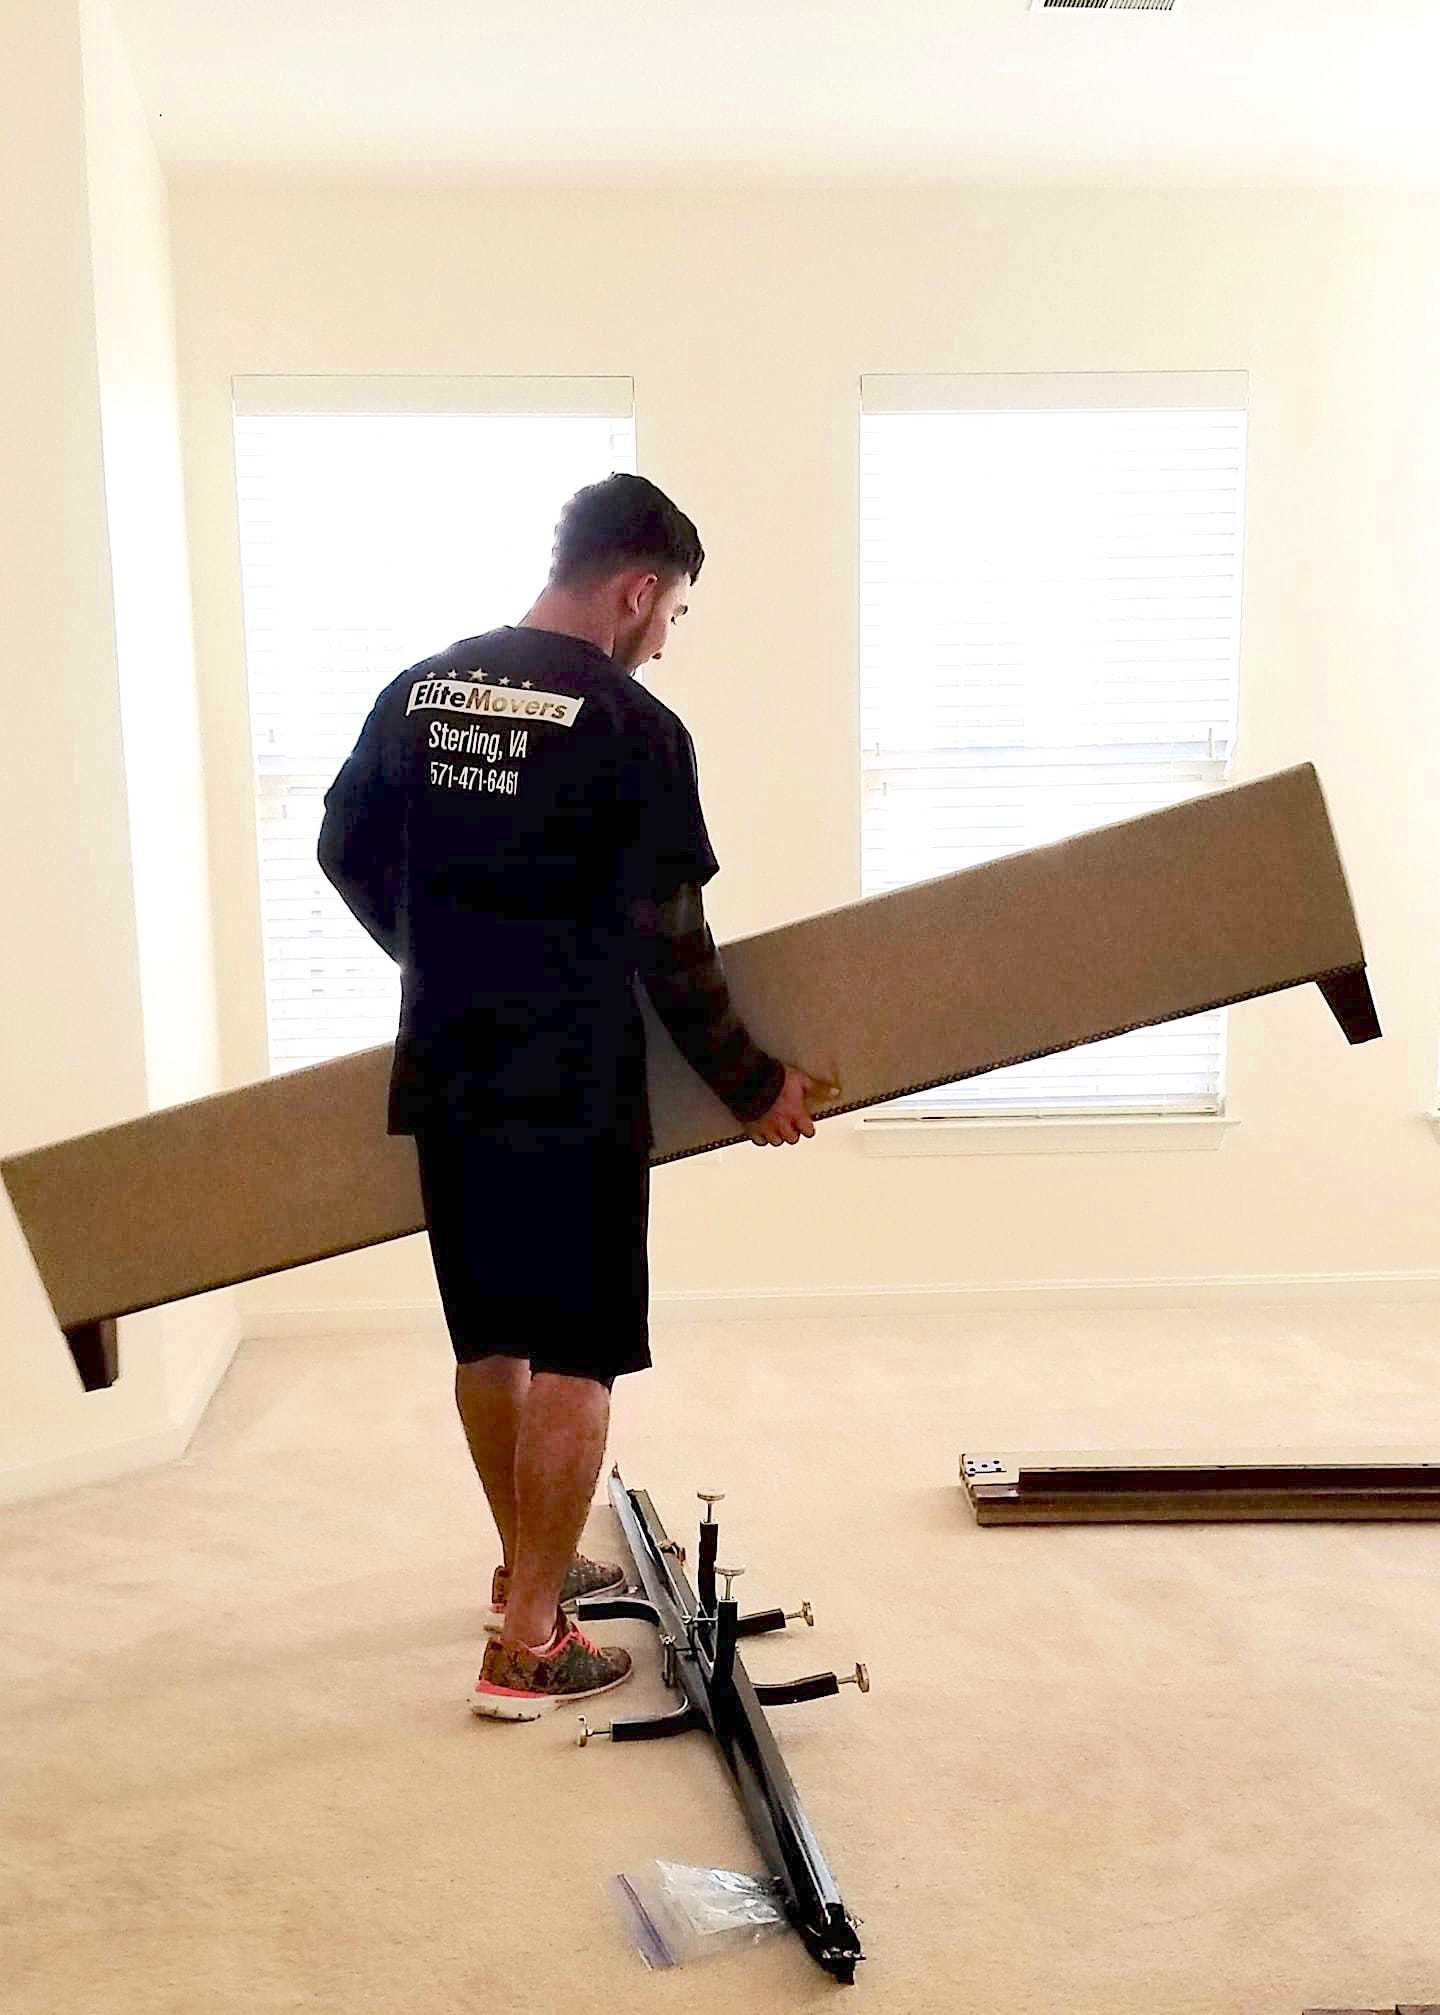 Elite mover employee holding a wooden board